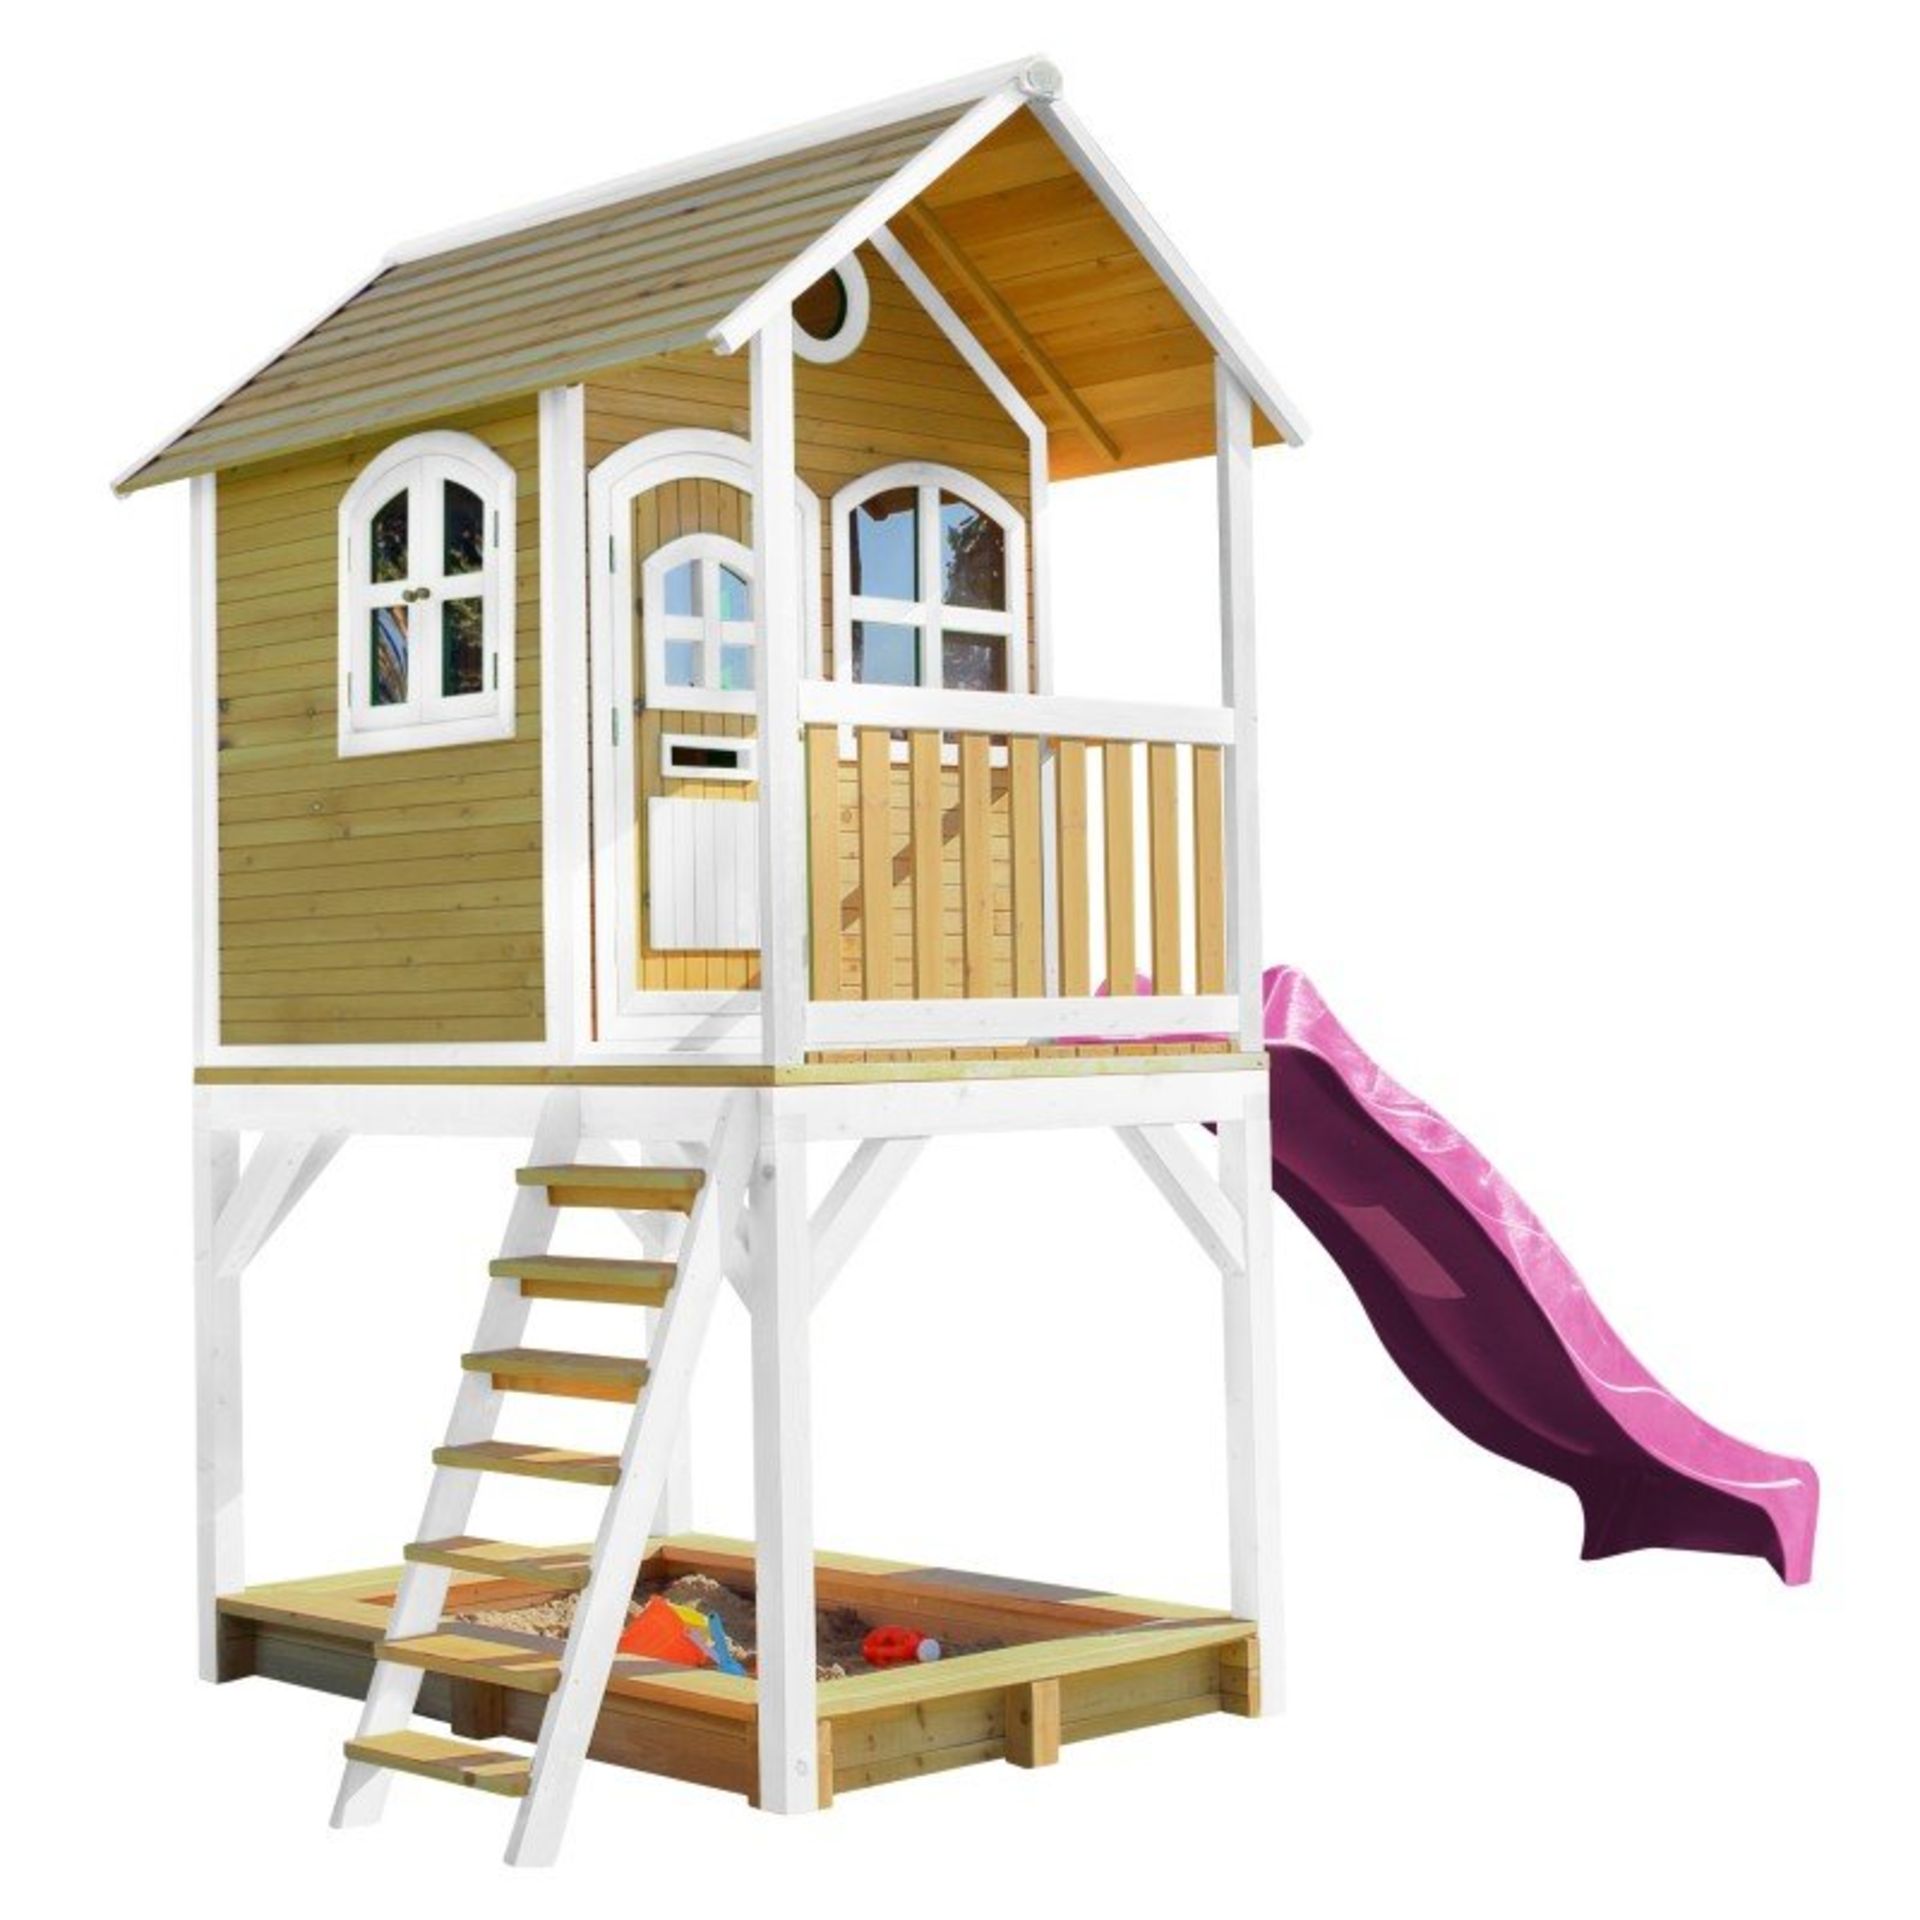 AXI PLAYHOUSE BROWN WHITE WITH PURPLE SLIDE RRP £1699